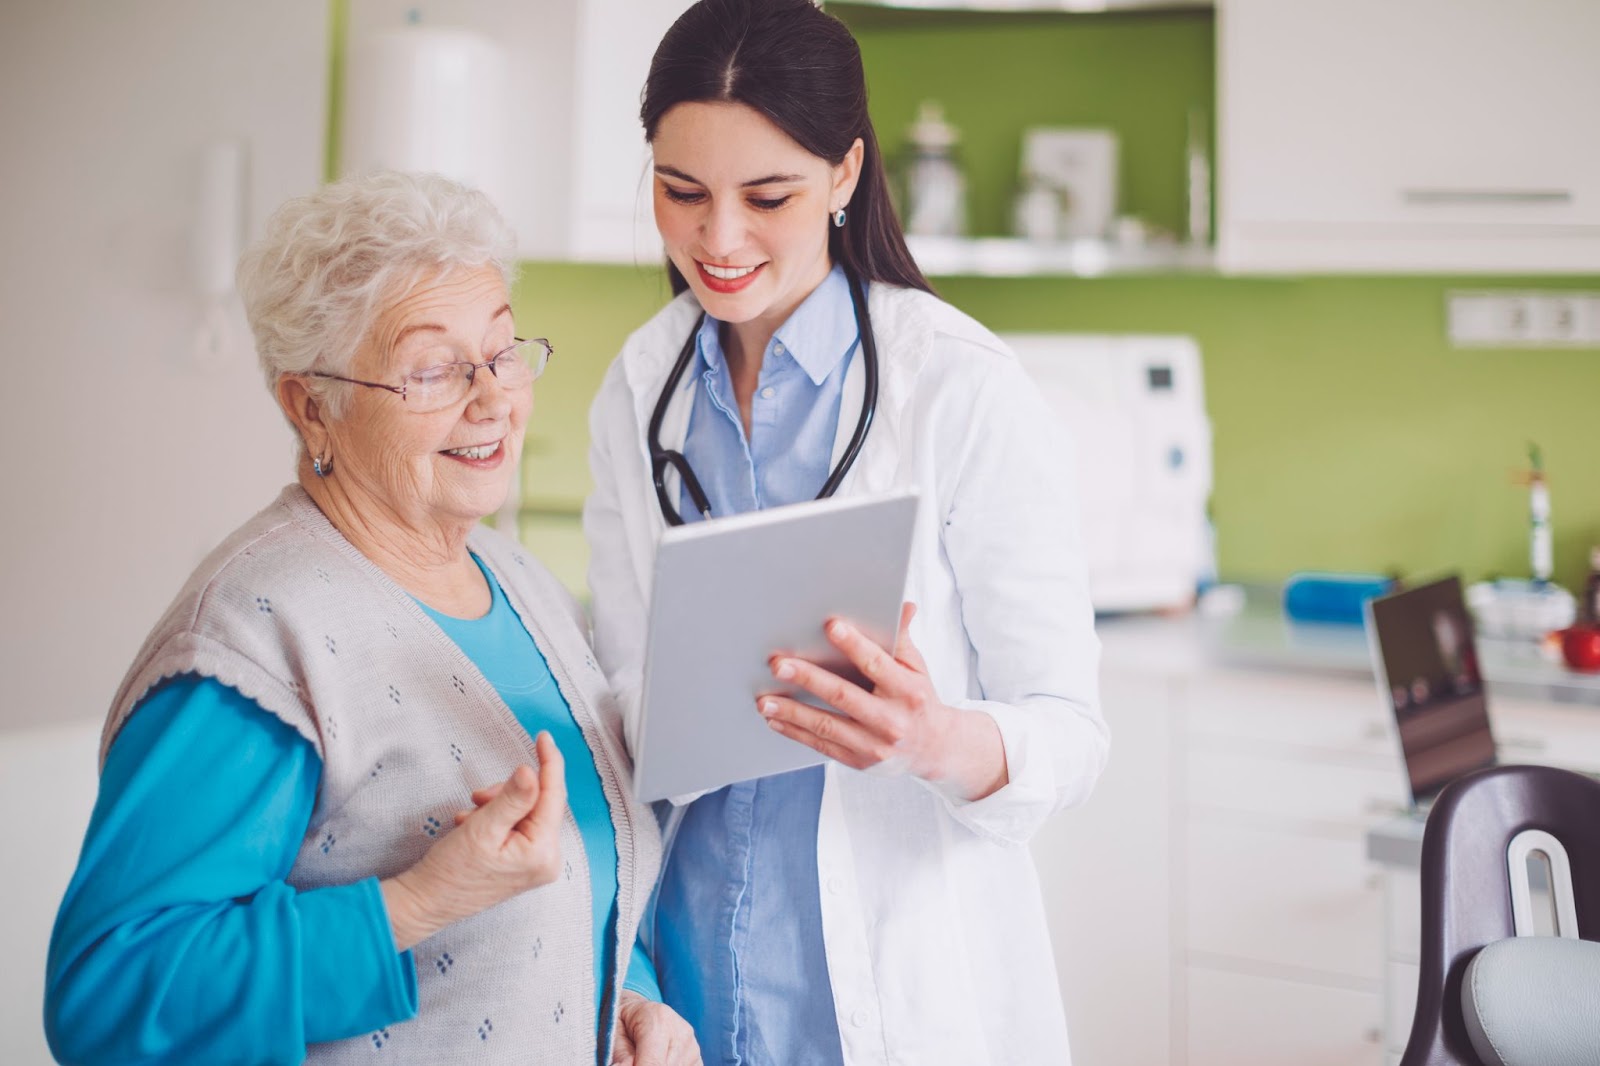 millenial physicians - helping older generations